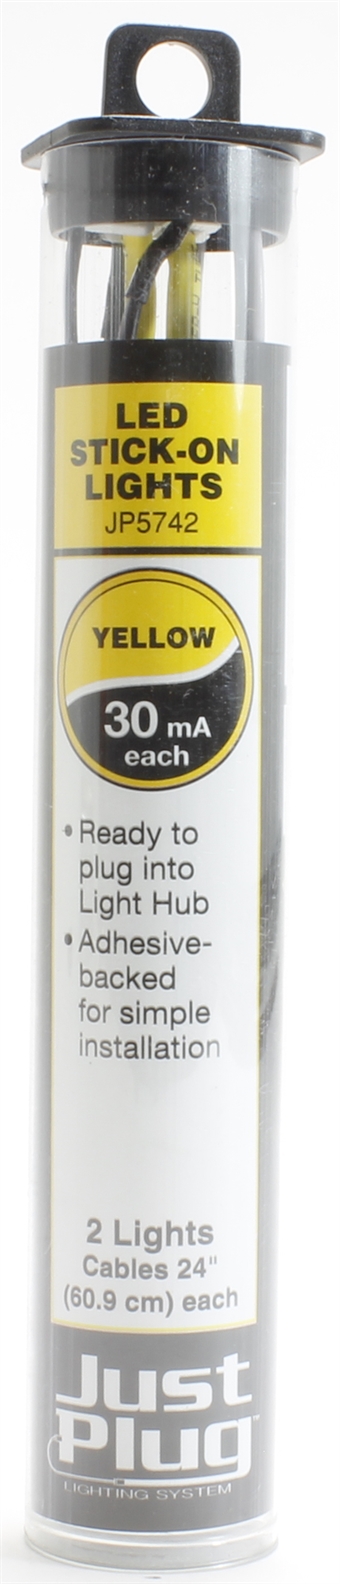 Yellow LED stick-on lights for Just Plug lighting system